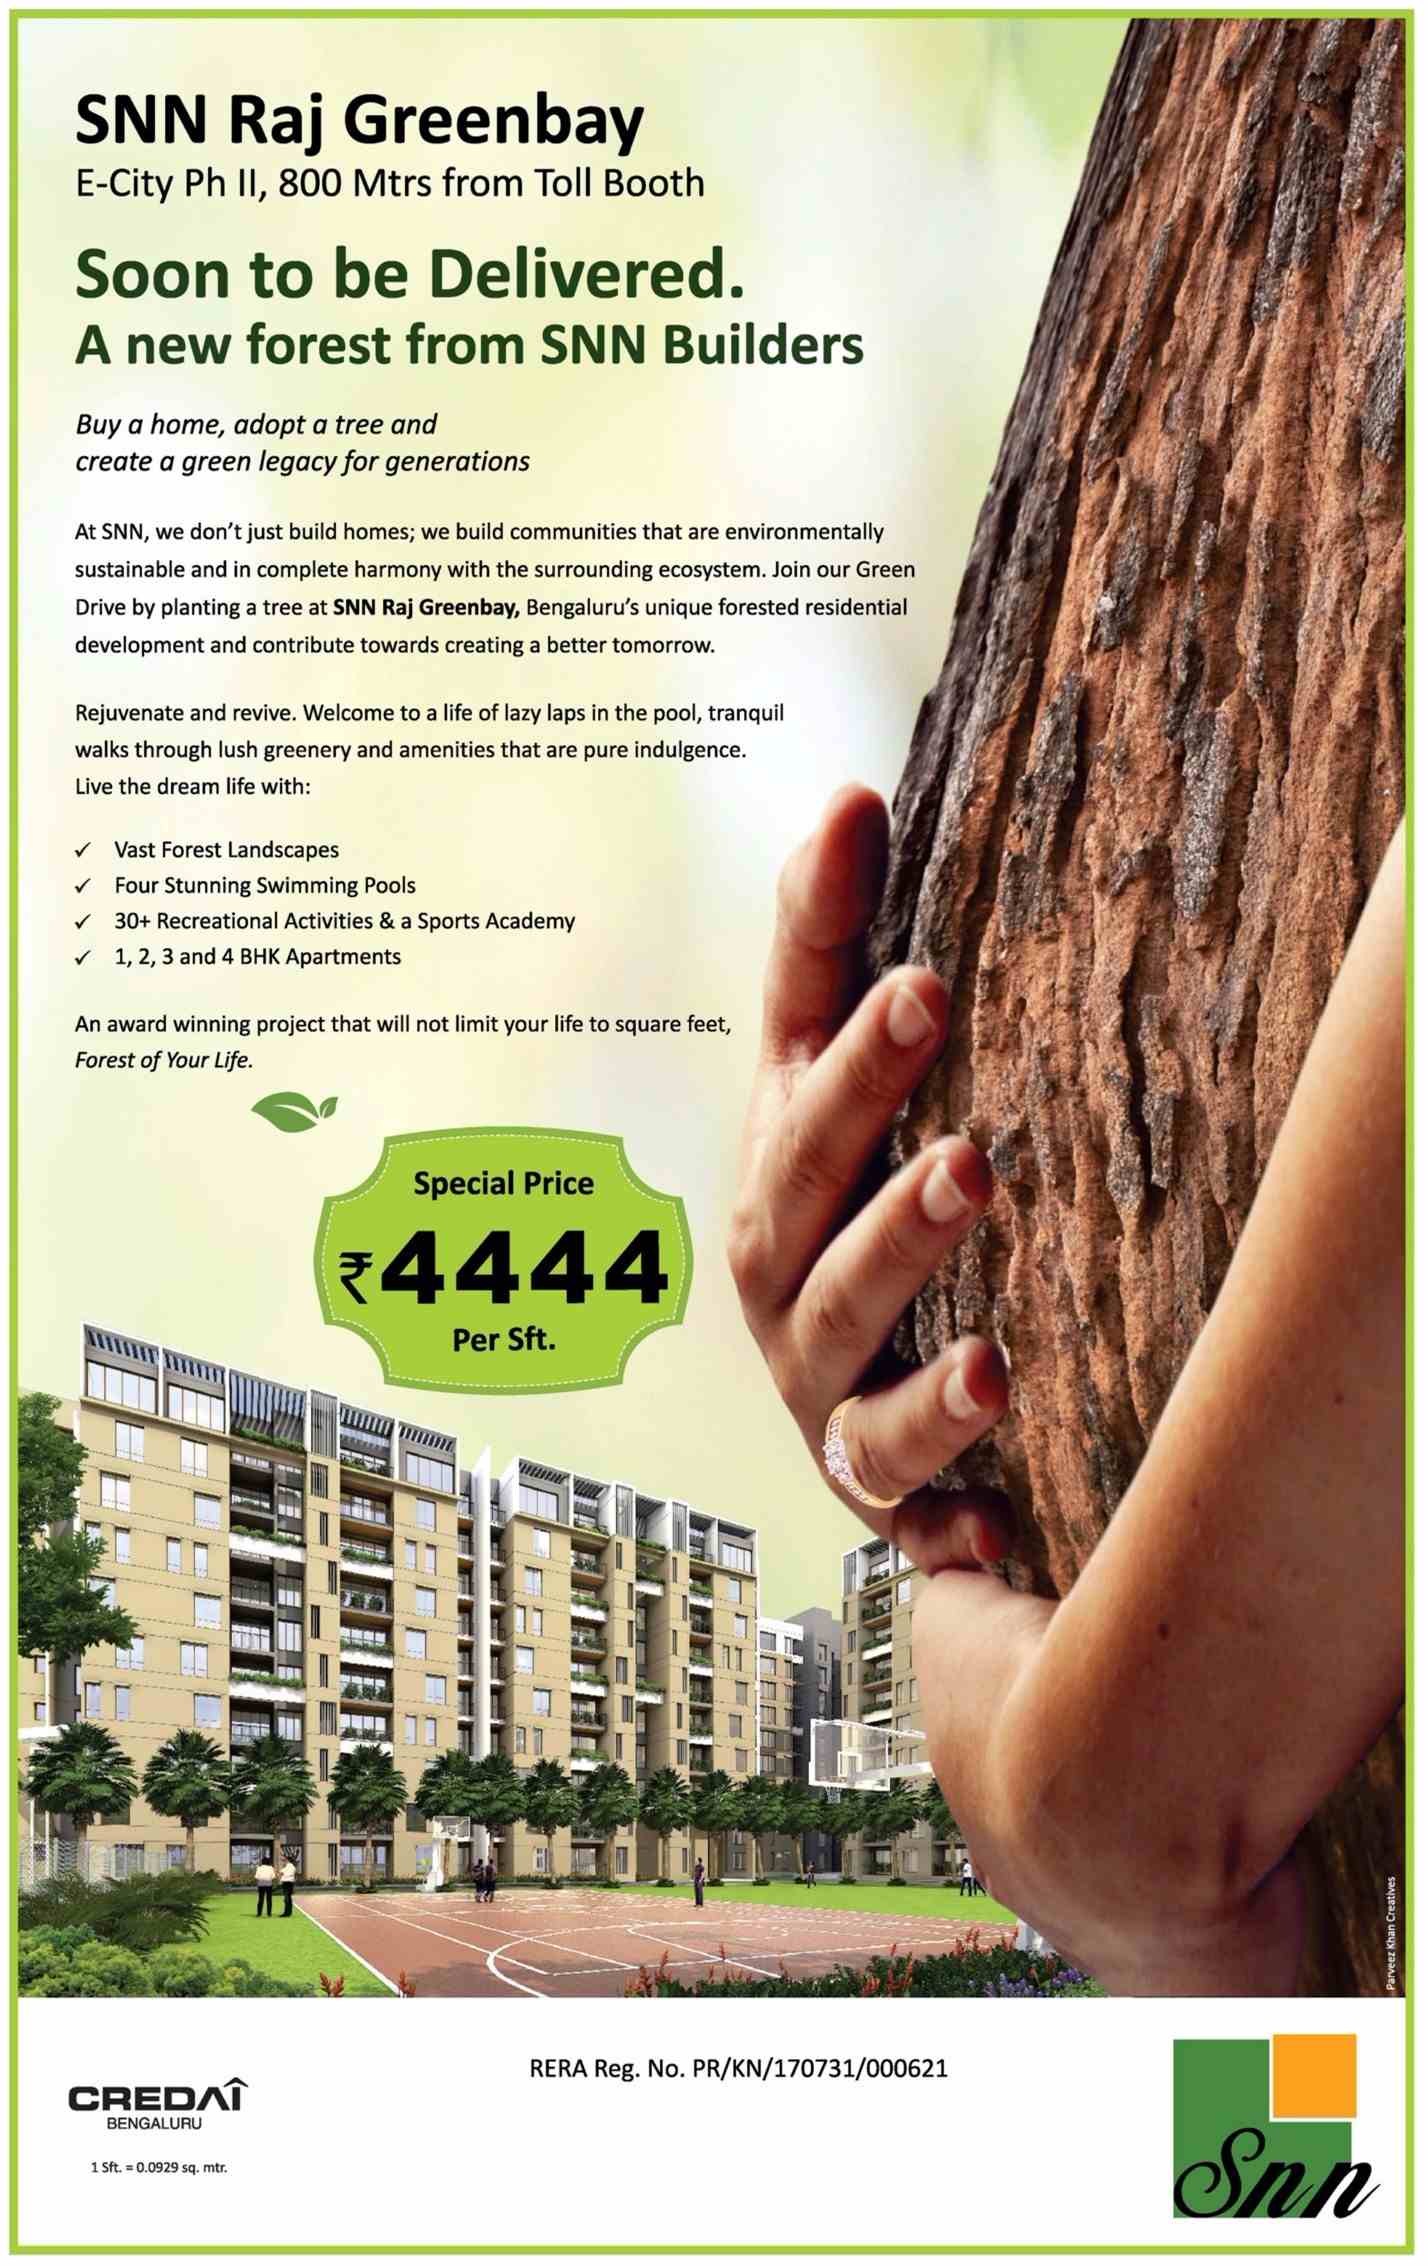 SNN Raj Greenbay - Soon to be delivered, a new forest from SNN Builders in Bangalore